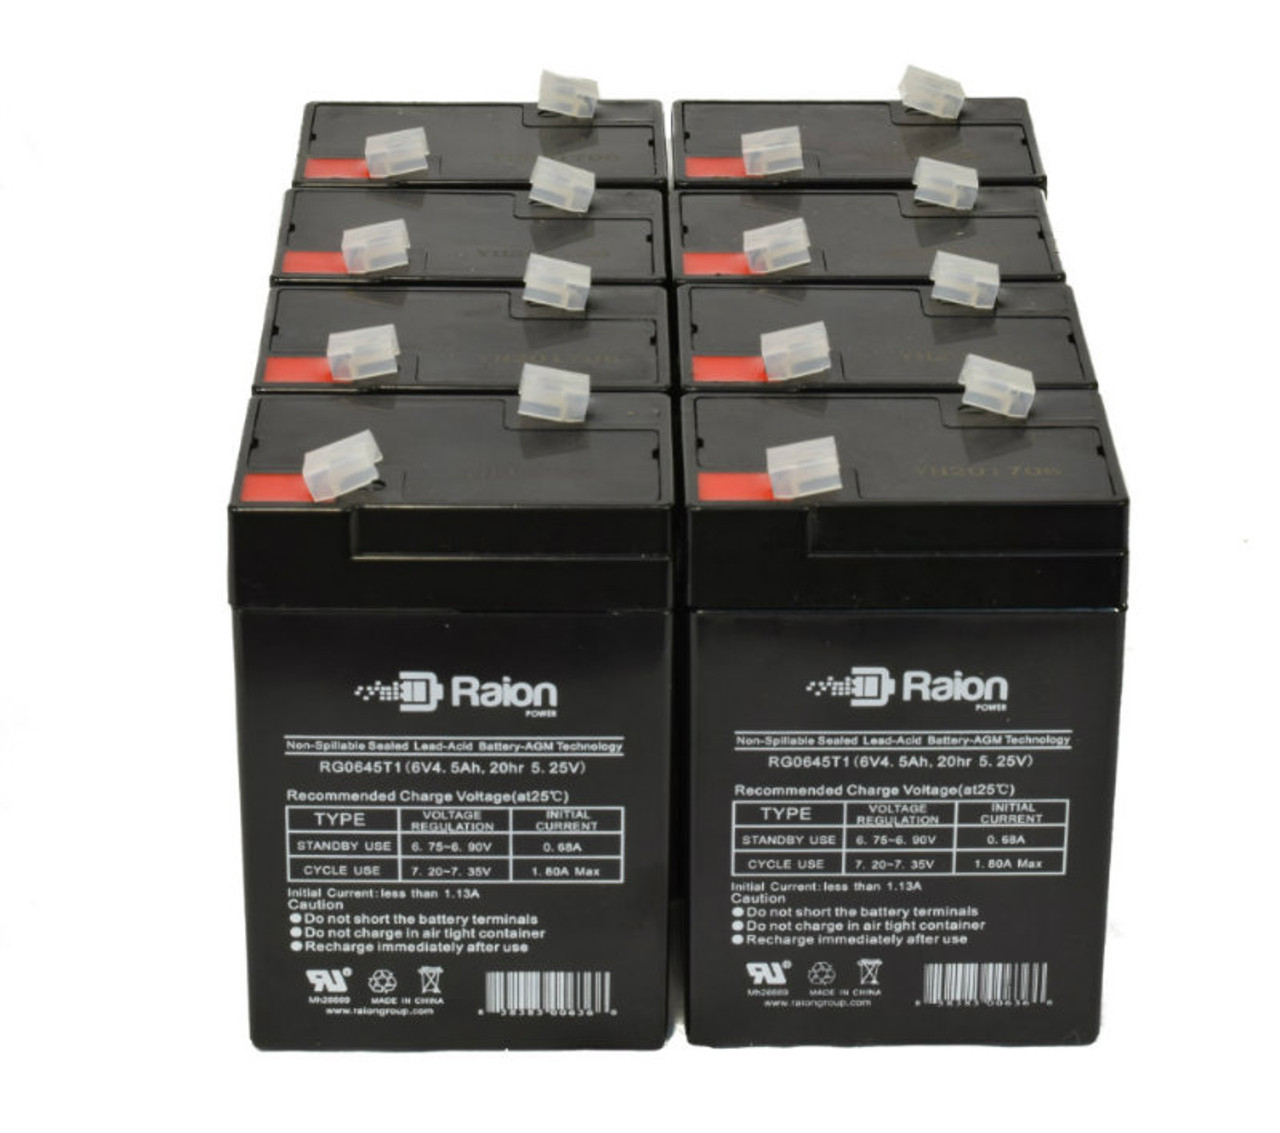 Raion Power 6 Volt 4.5Ah RG0645T1 Replacement Battery for Sentry PM640F1 - 8 Pack